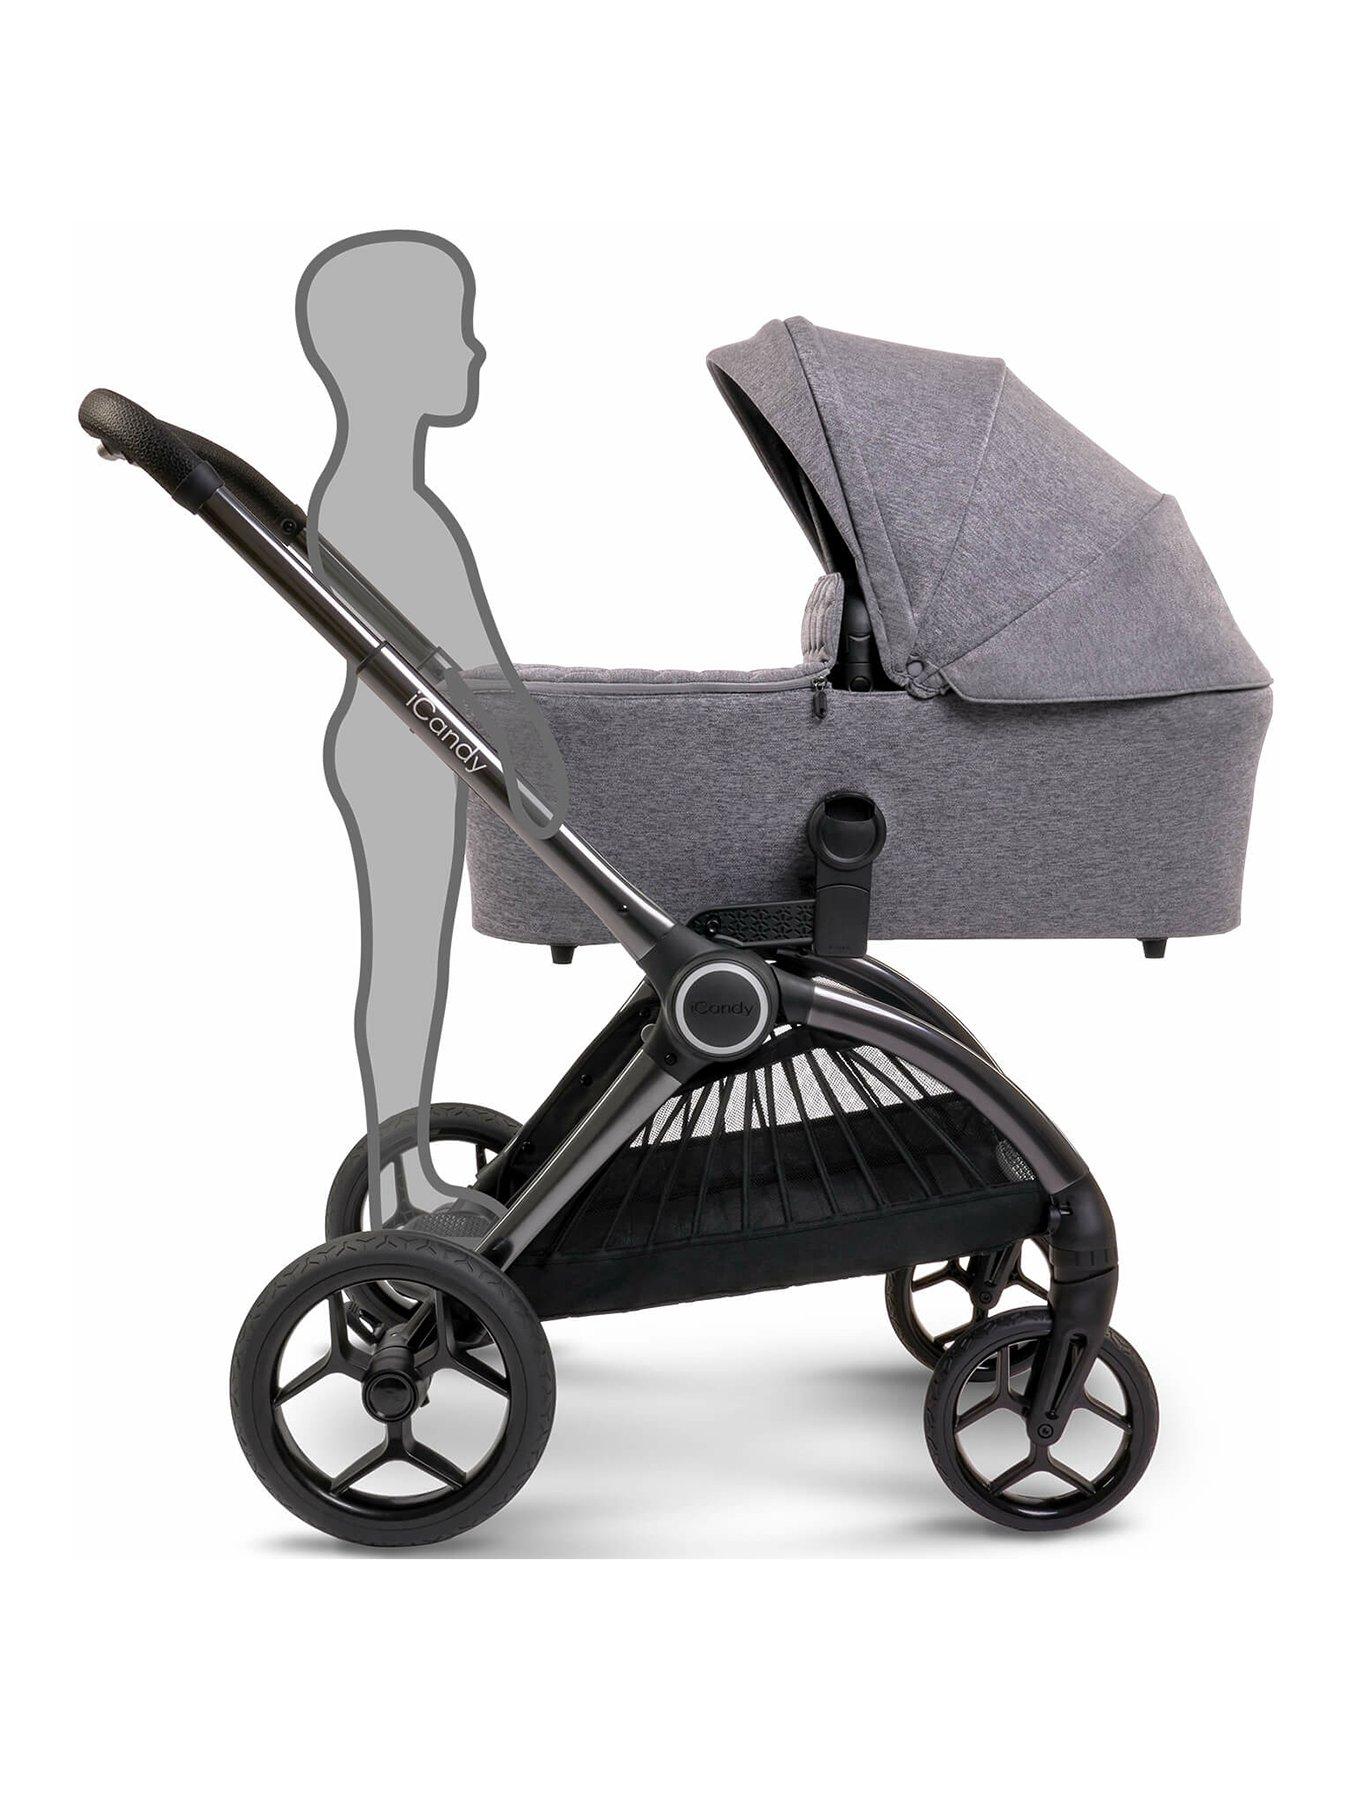 iCandy Core Complete Bundle - Pushchair, Carrycot, Footmuff & Accessories -  Light Grey